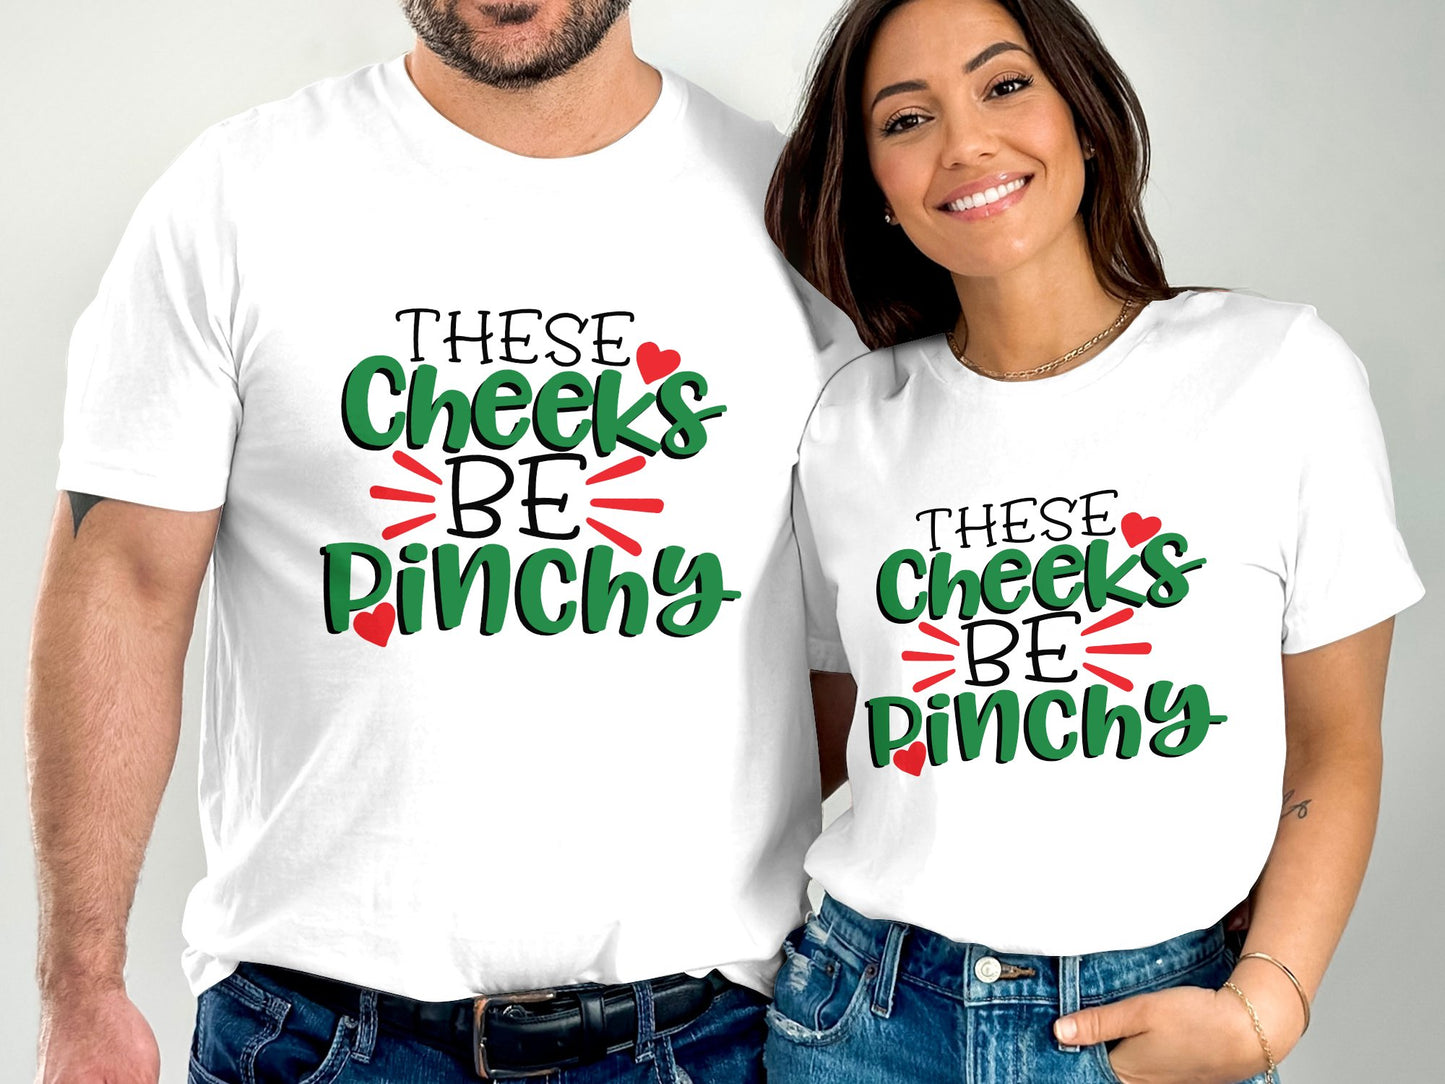 These Cheeks be Pinchy (St. Patrick's Day T-Shirt)